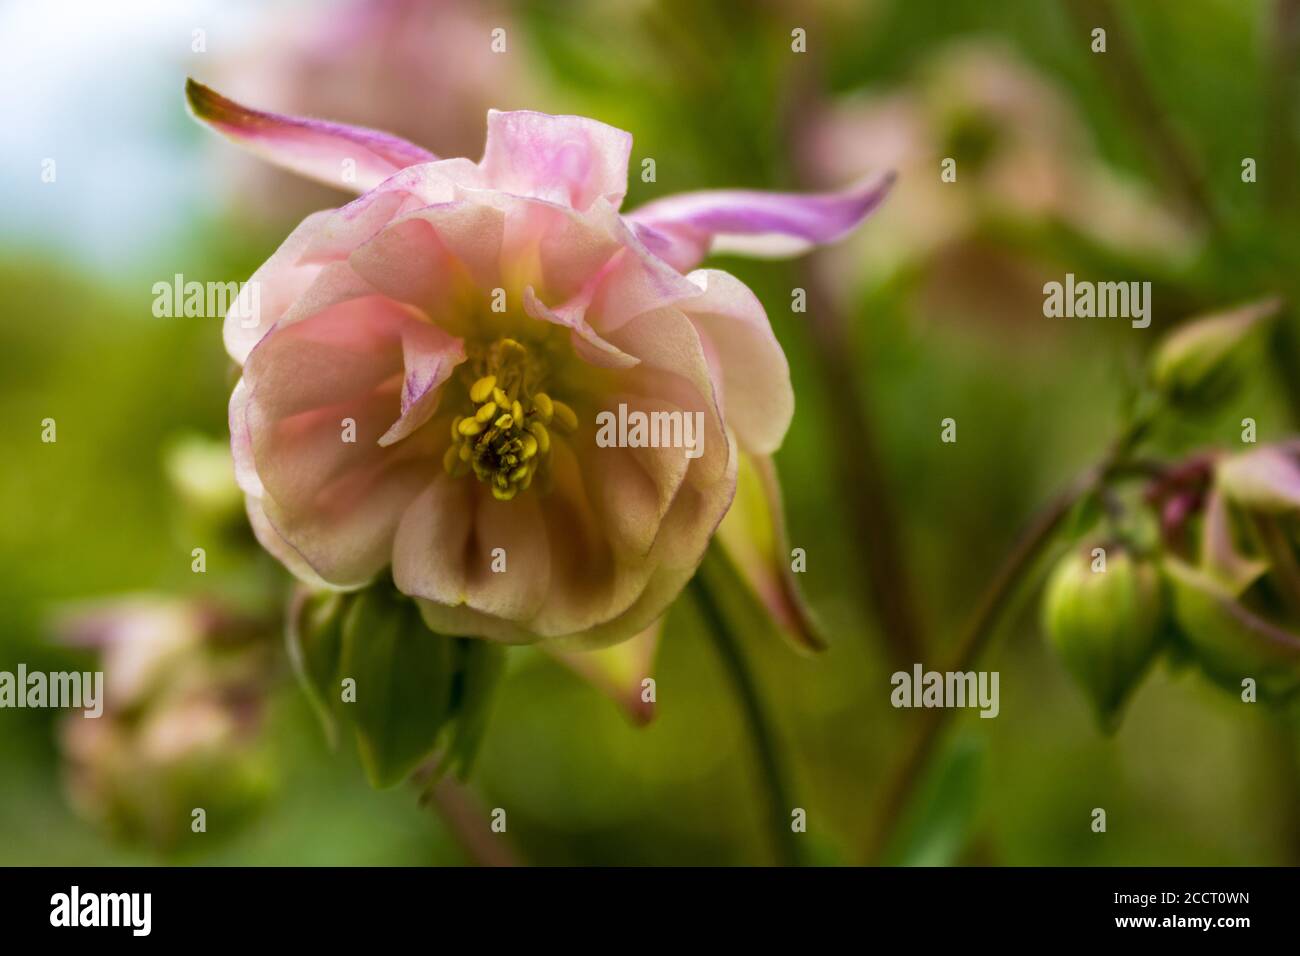 Soft focus of a winky double rose pink flower against a blurry background Stock Photo